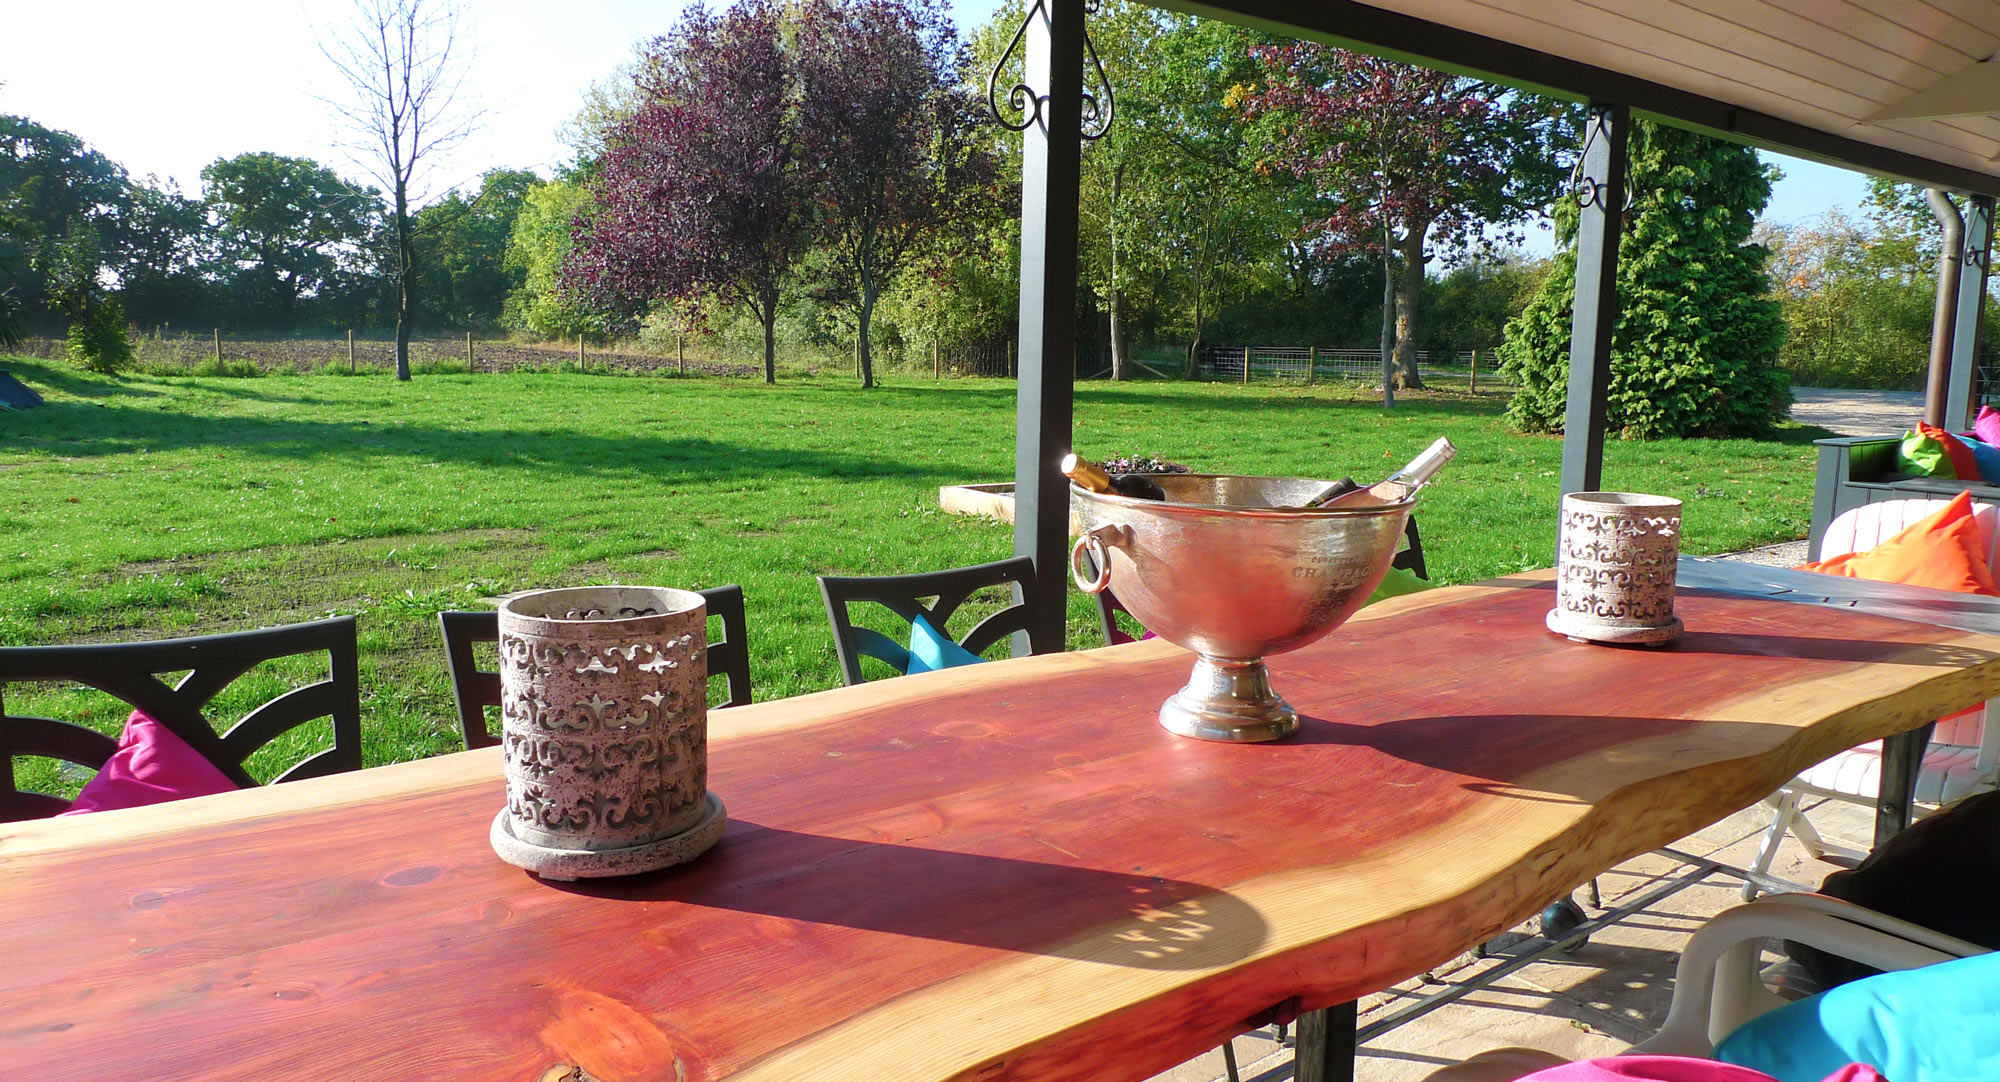 Woodland Lodge Retreat, Group Accommodation Holiday Home, 10-14 guests